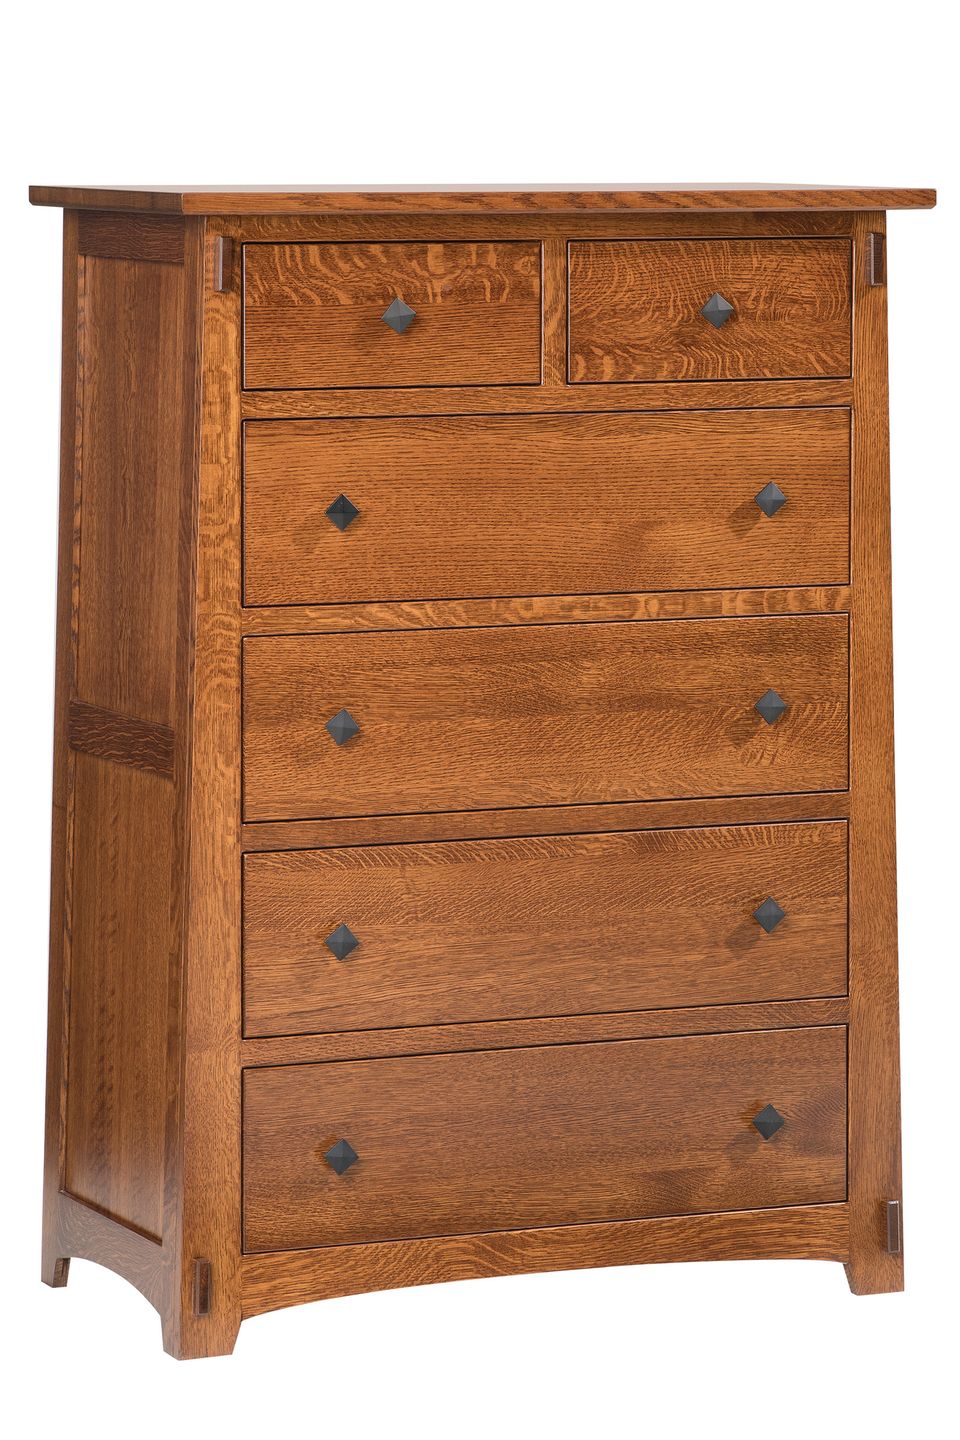 Qf 5600 6 drawer chest